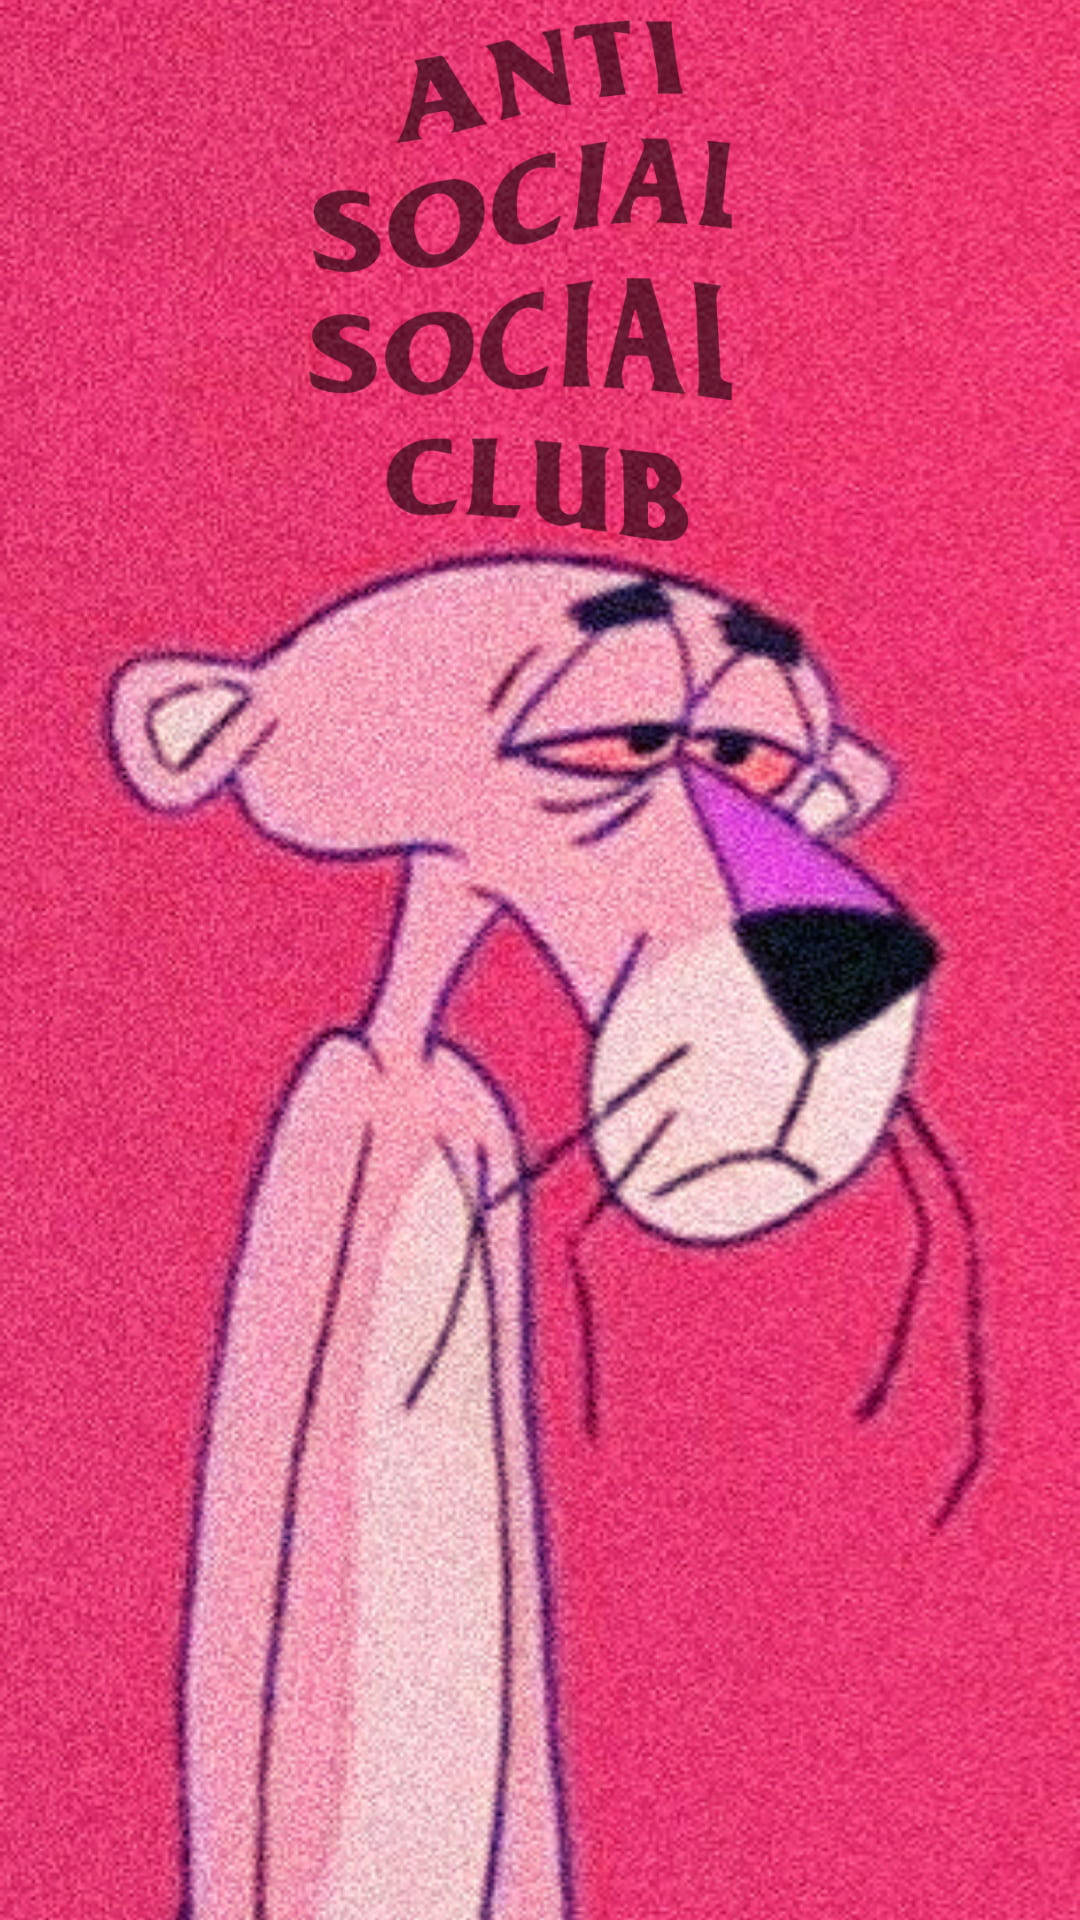 Caption: Distinctive Pink Panther Graphic On Anti Social Social Club Merchandise Background